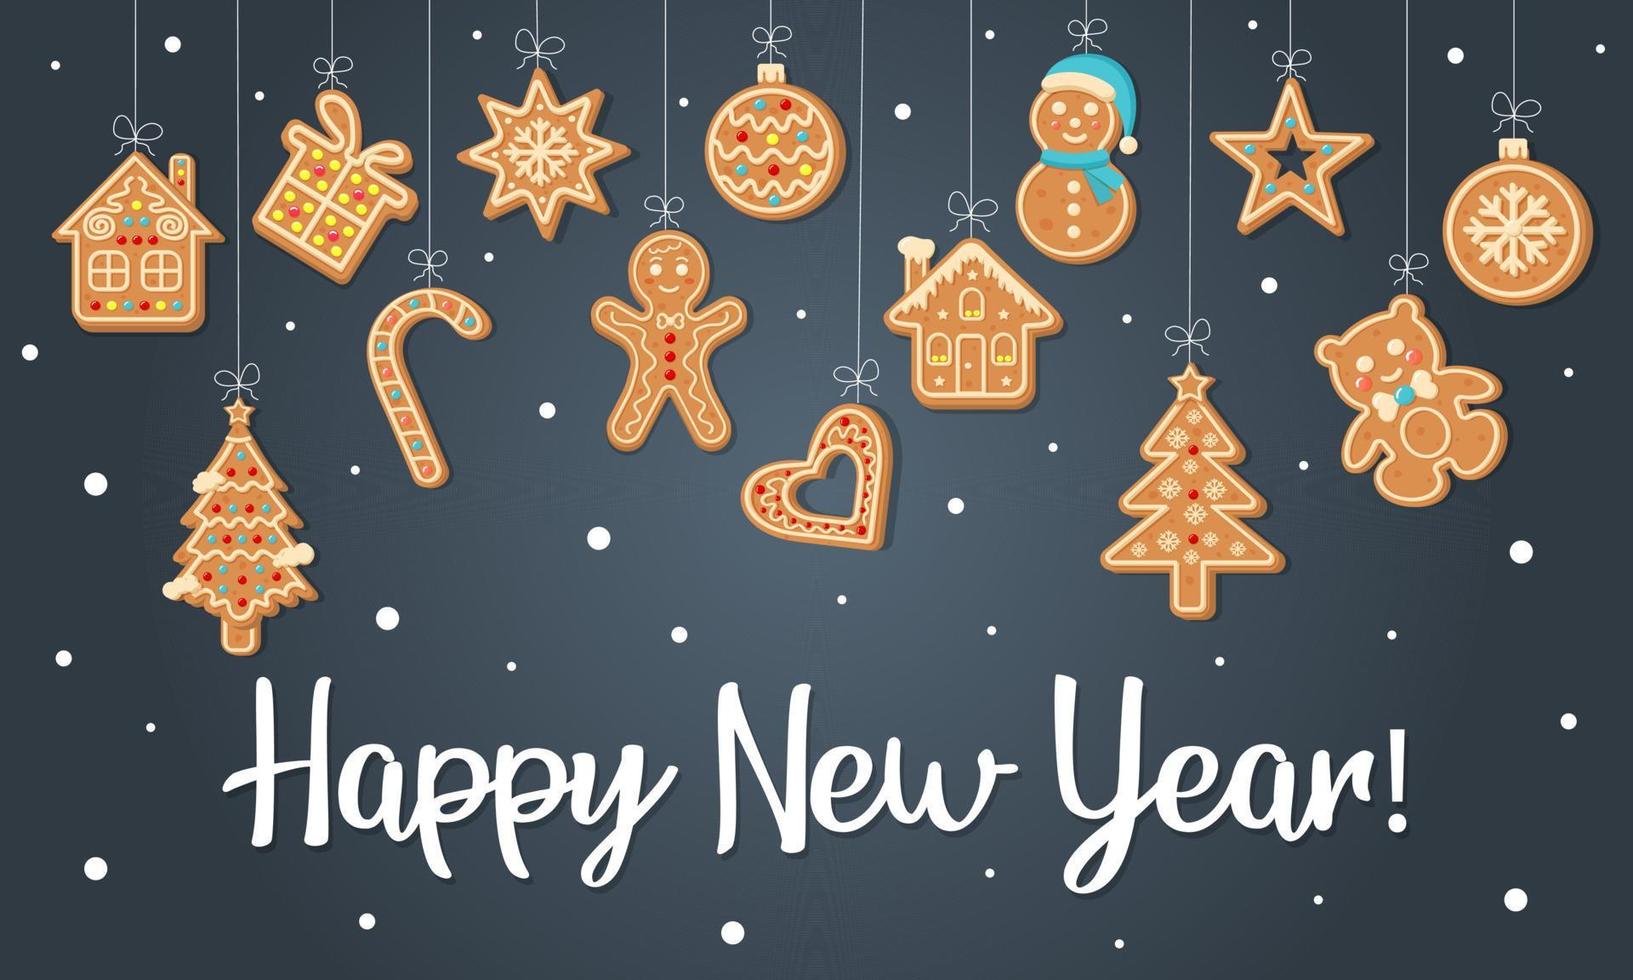 Happy New Year Greeting Card with hanging gingerbread cookies. vector